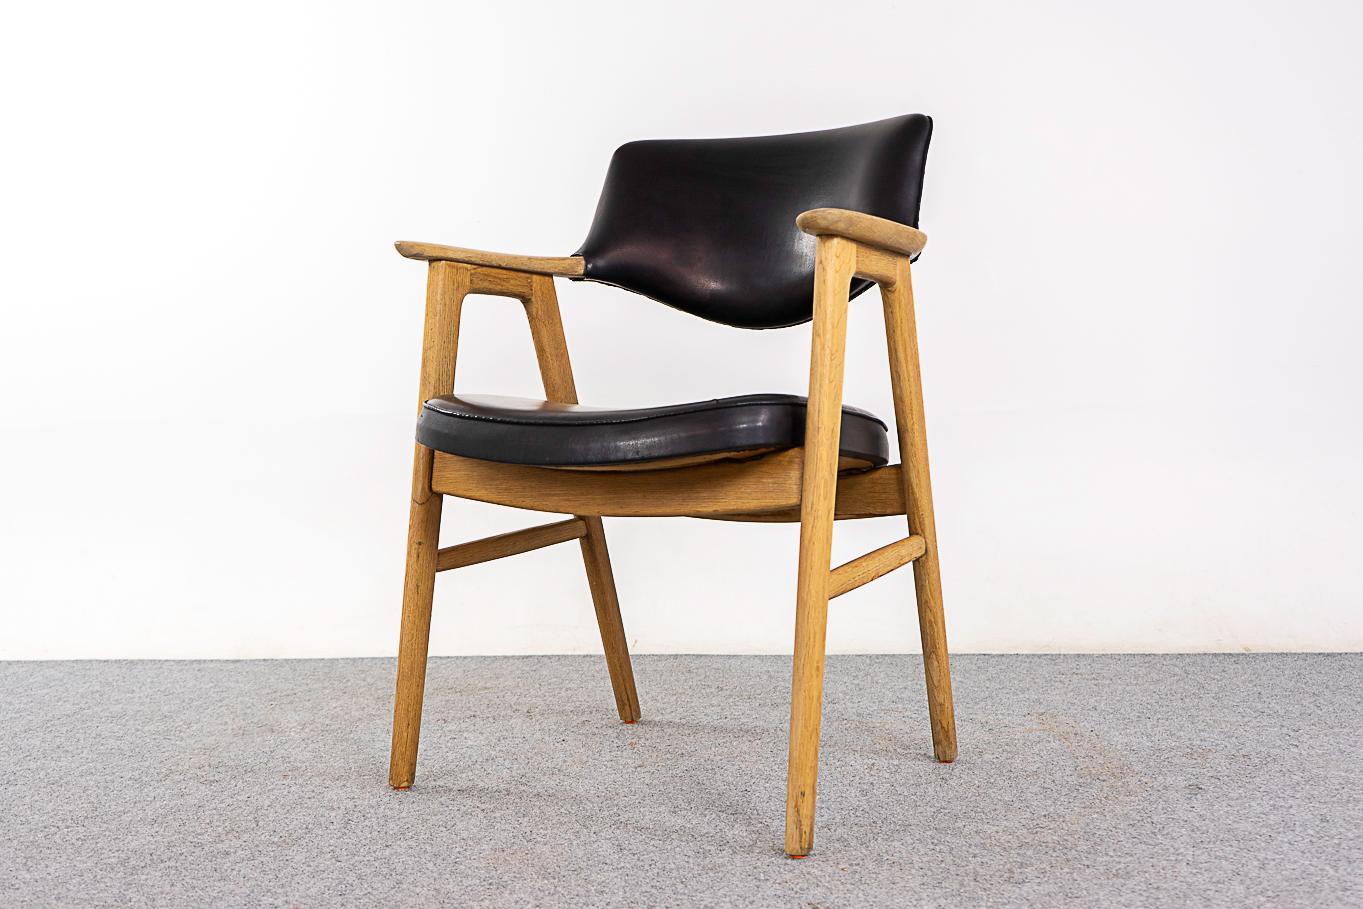 Danish Modern oak chair by Erik Kirkegaard, circa 1960's. This beautifully sculpted solid oak frame offers comfort without an imposing footprint.  Chair shows original upholstery with wear.

Underside of chair shows Erik Kierkegaard maker's